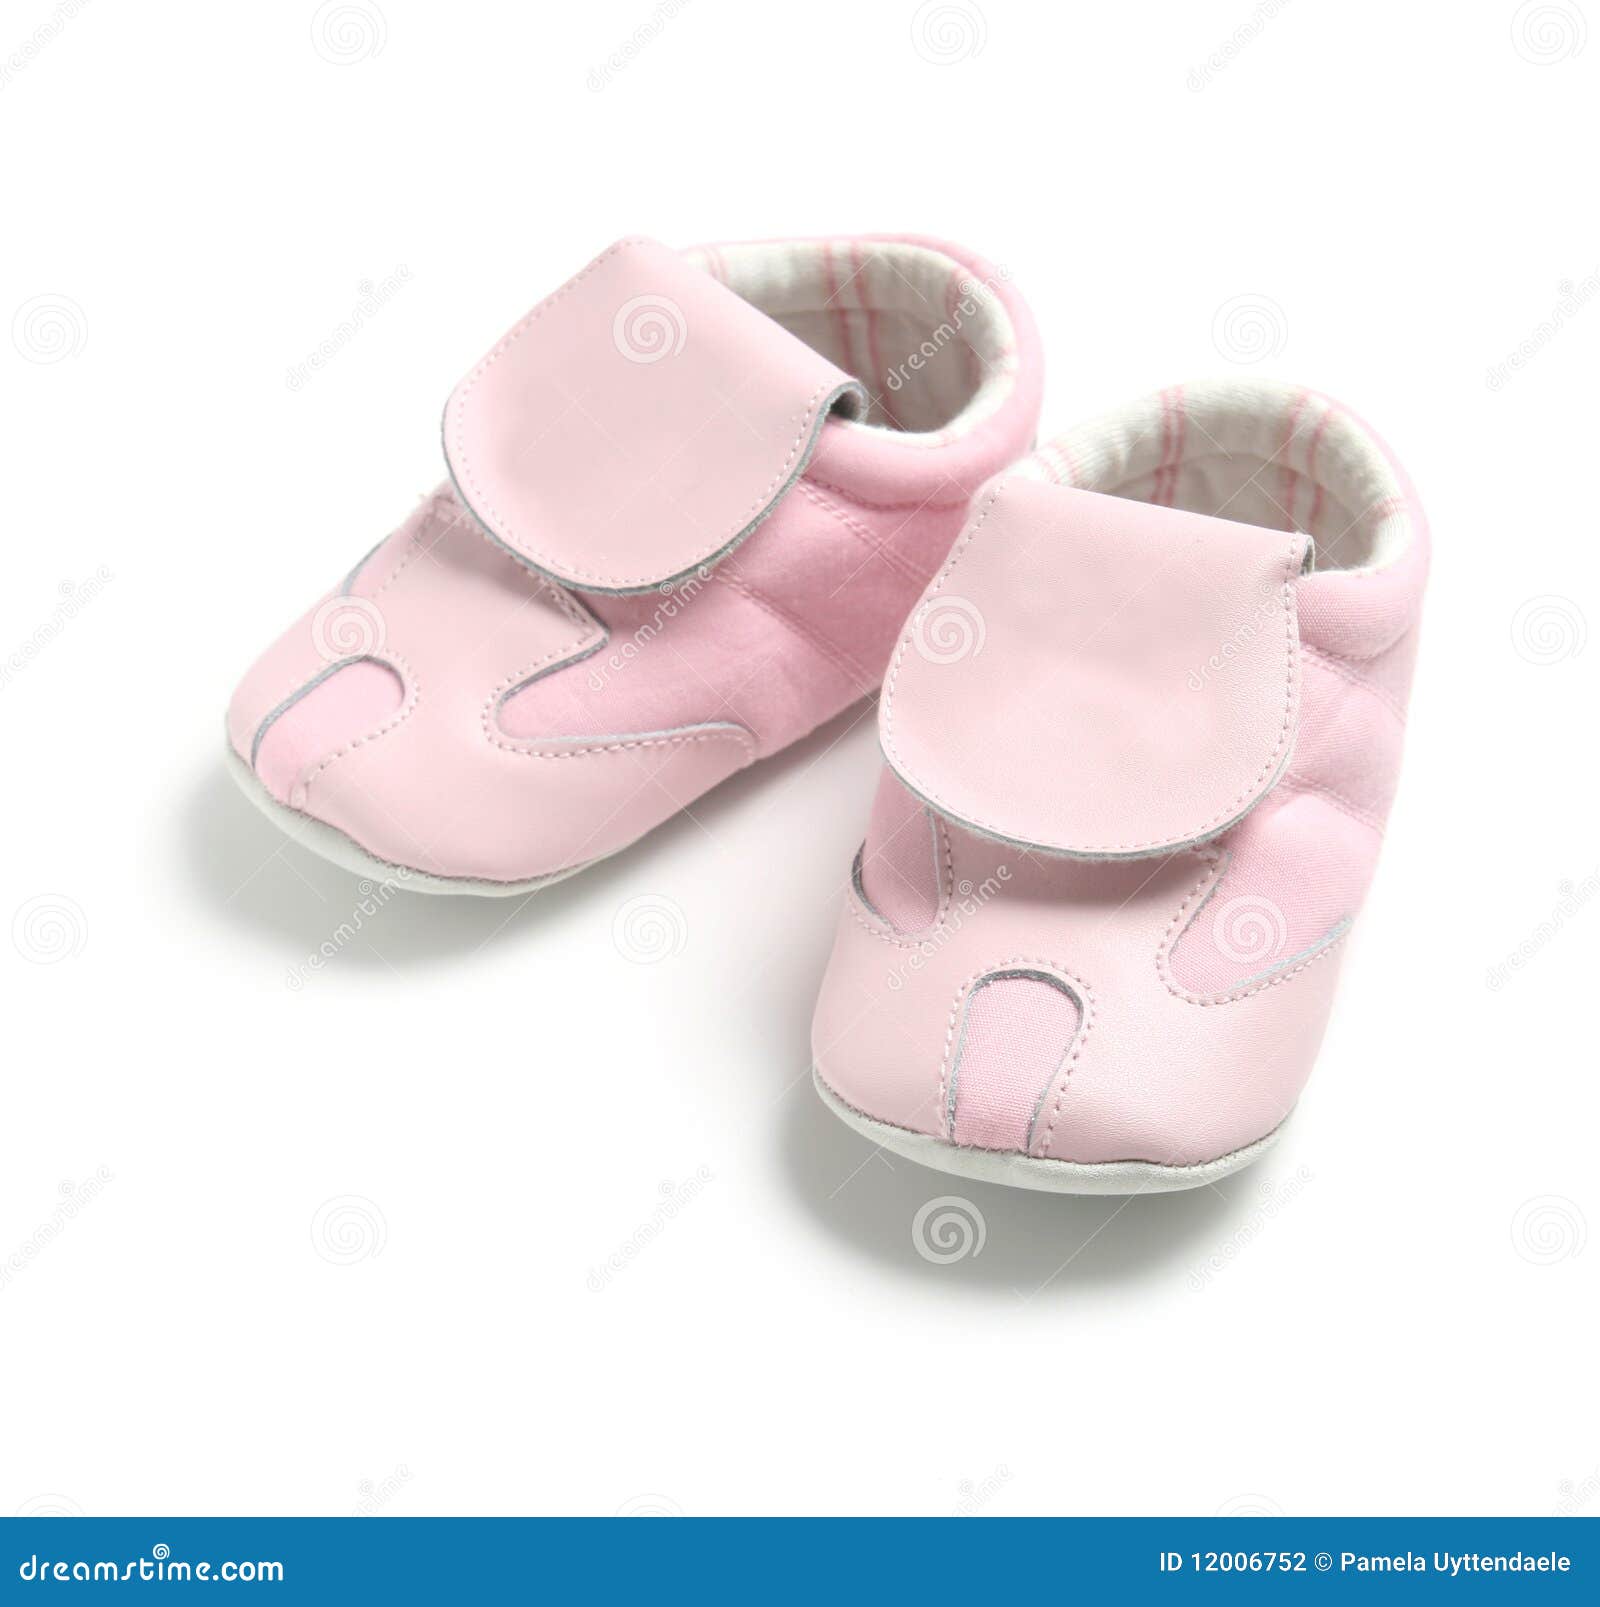 Pink Baby Shoes Stock Photography - Image: 12006752